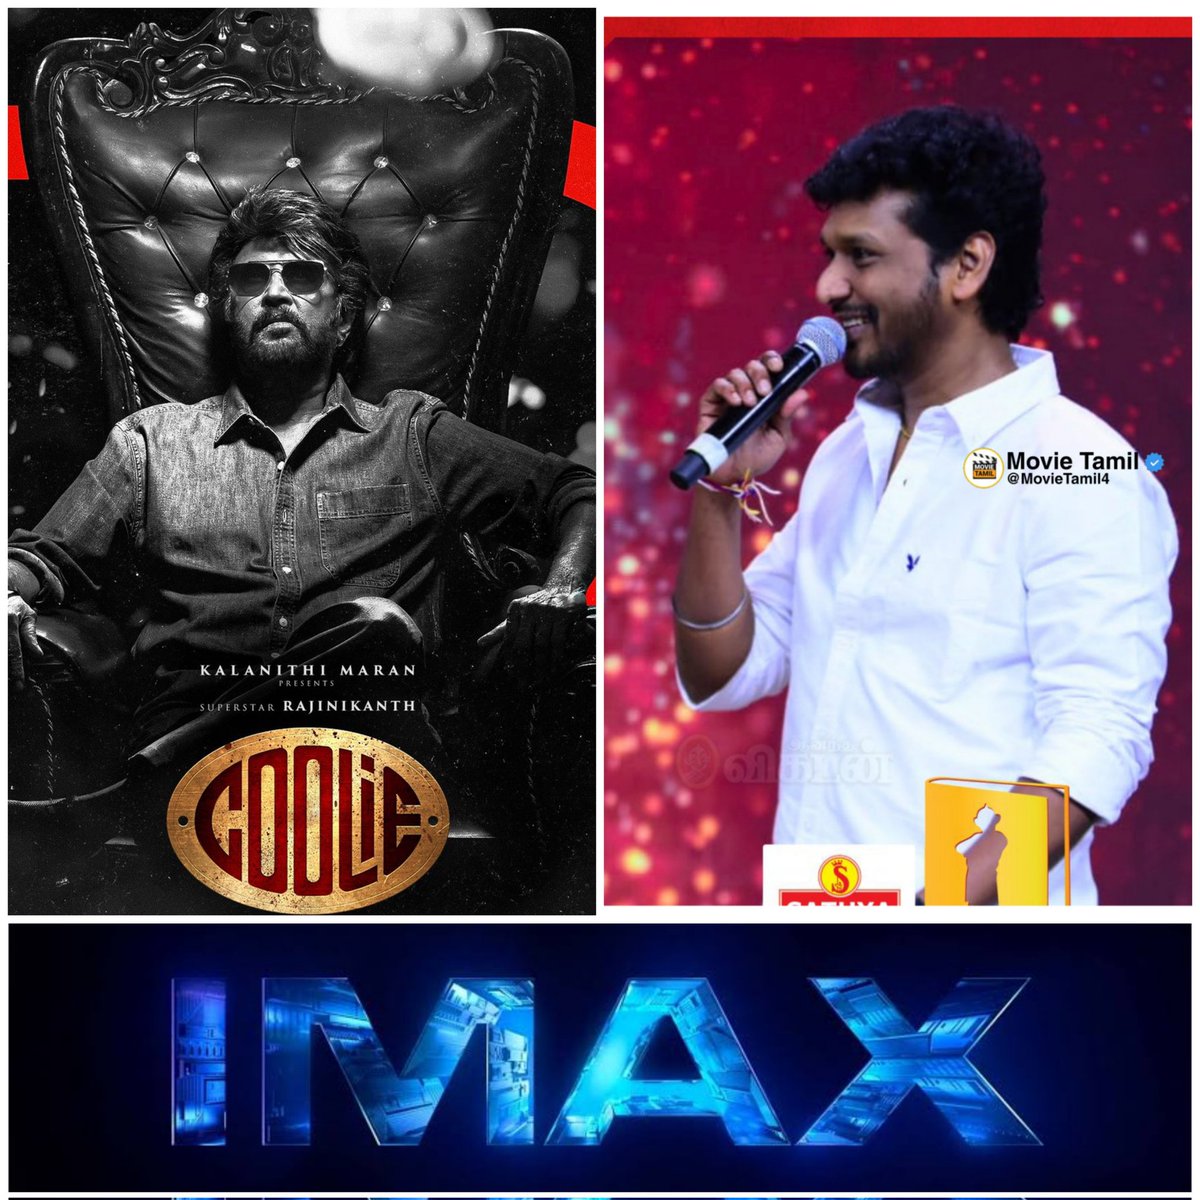 #Coolie Update 🌟 

#SuperstarRajinikanth starrer COOLIE is going to be shot in 'IMAX' format.
- #GirishGangadharan will work with Lokesh again in this film if #Vikram has a DOP.💥
- 70 percent of this film will be shot in IMAX format. New Technology are available to use...